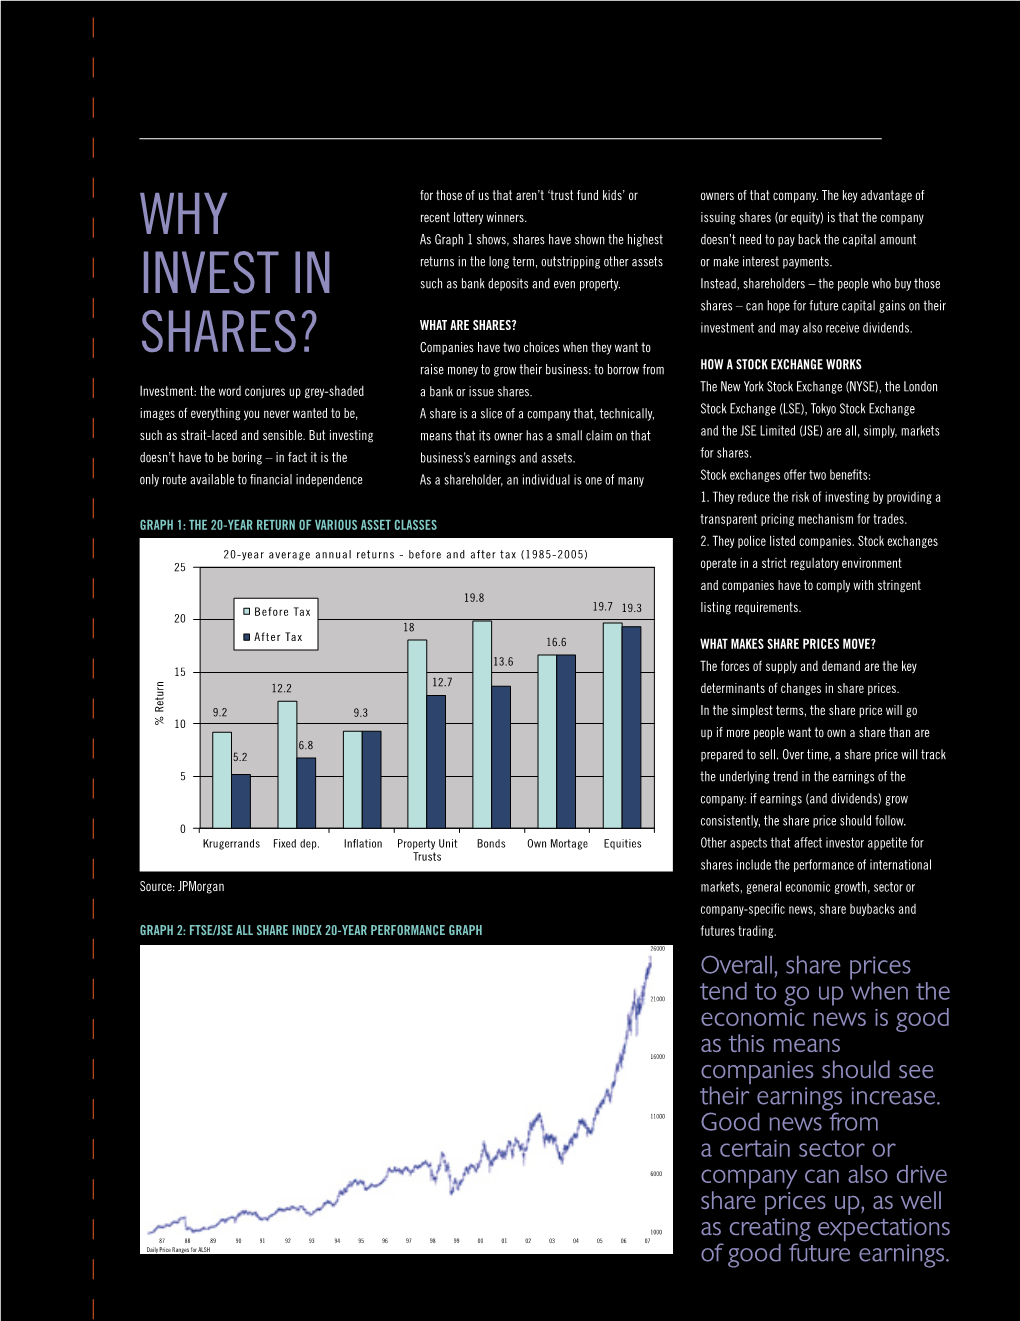 Why Invest in Shares?